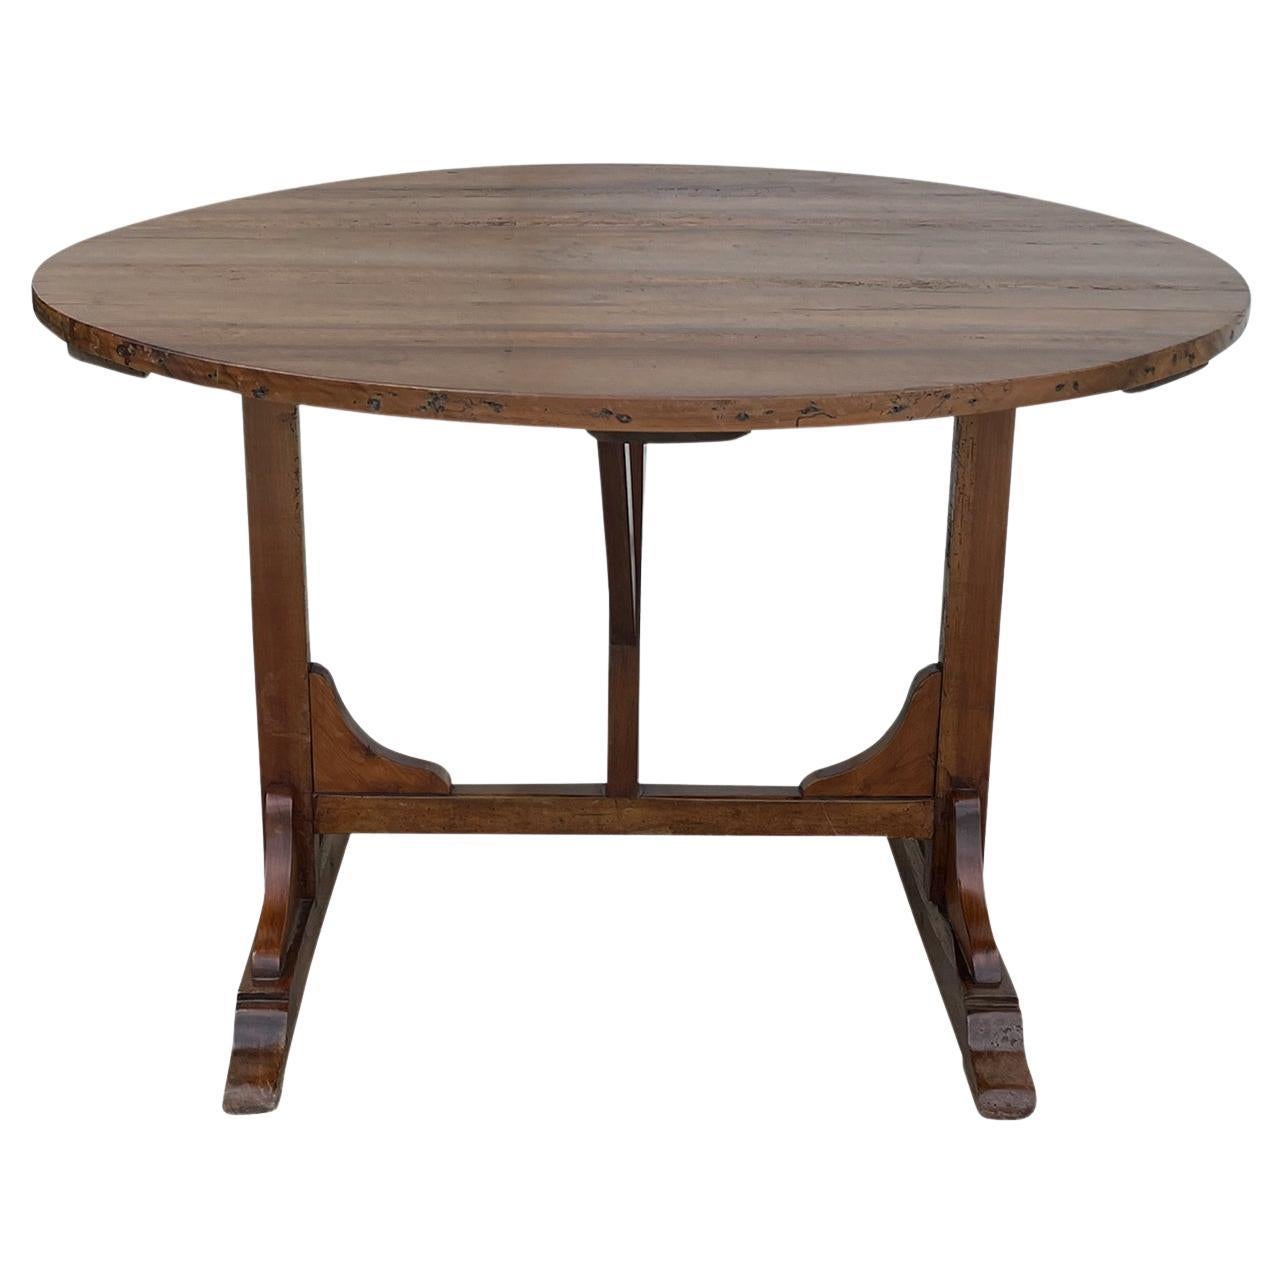 19th Century French Provencal Walnut Folding Wine Table - Antique Center Table For Sale